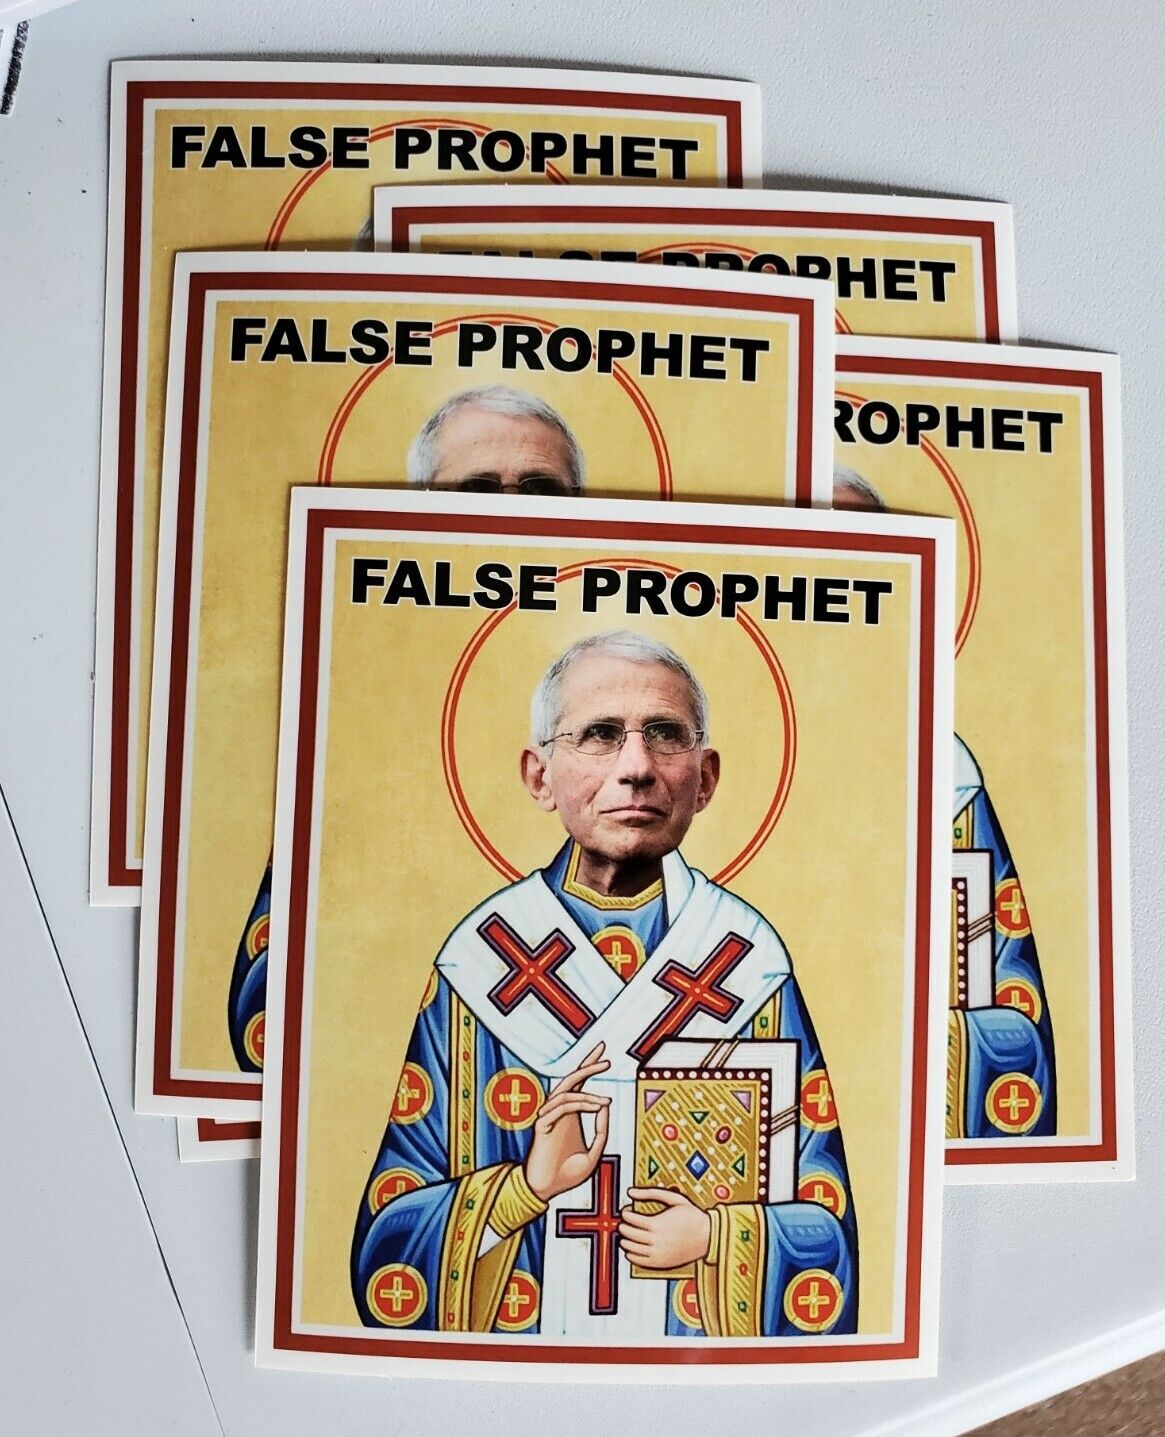 Dr. Fauci Stickers 3 PACK LOT TRUST THE SCIENCE 💉  Patron Saint of Wuhan 🇨🇳 